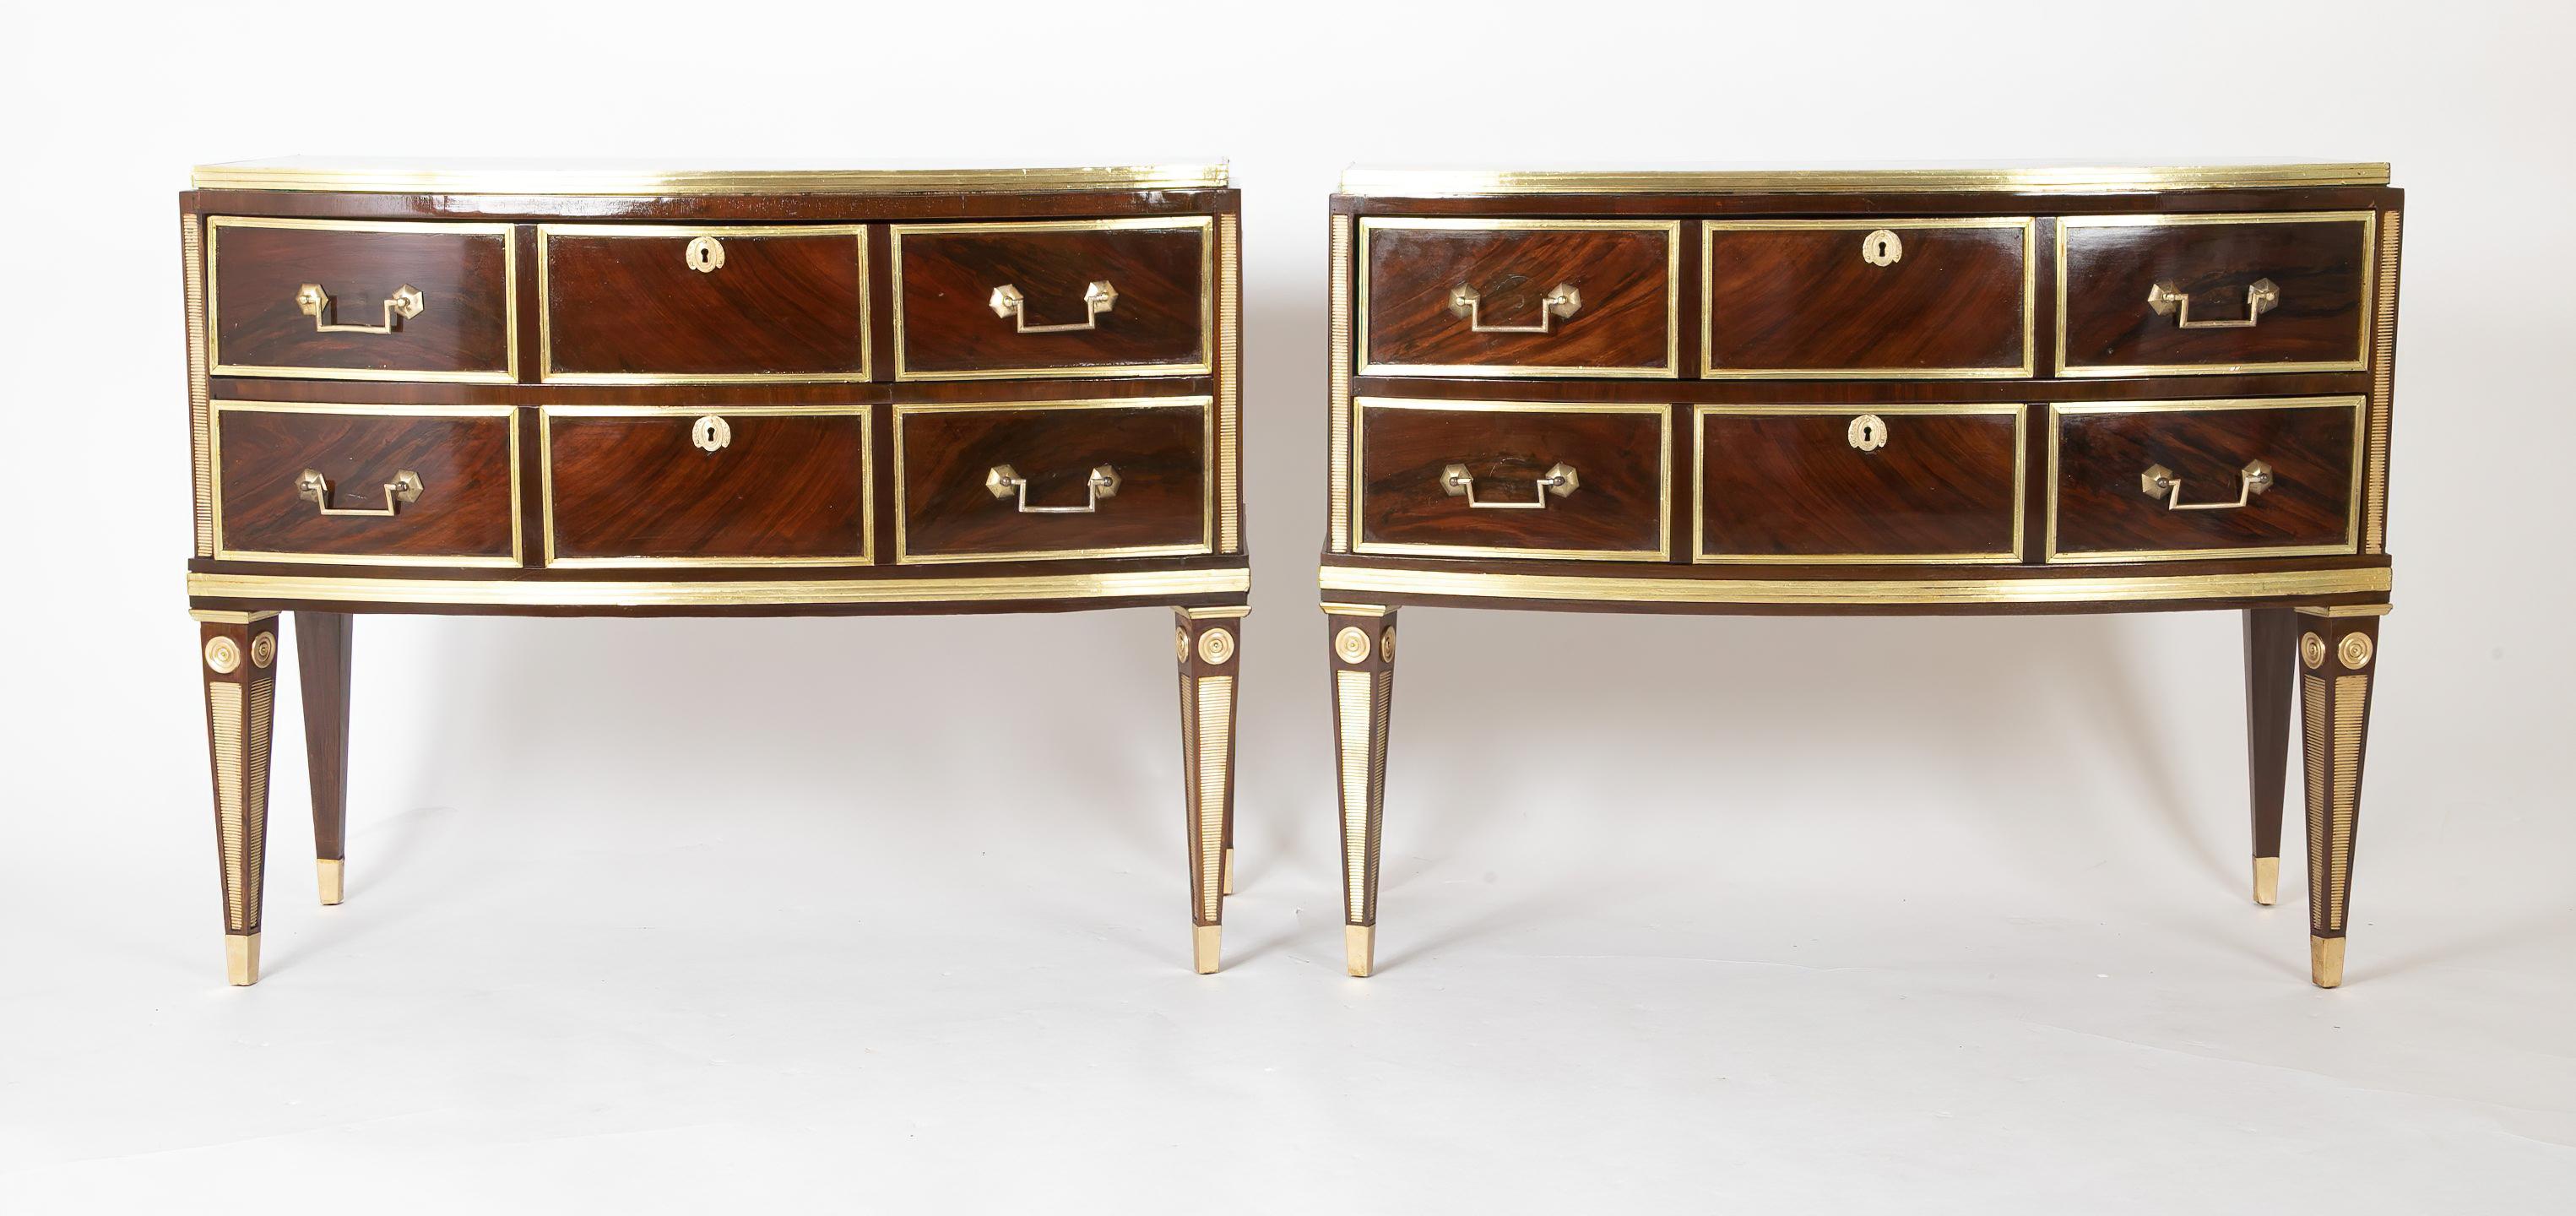 A rare pair of Russian neoclassic commodes, the figured mahogany exterior inlaid and mounted with reeded brass trim, with a stepped top and two bow front long drawers. The commodes are raised on square tapered and inlaid legs. 

Measures: 29.75